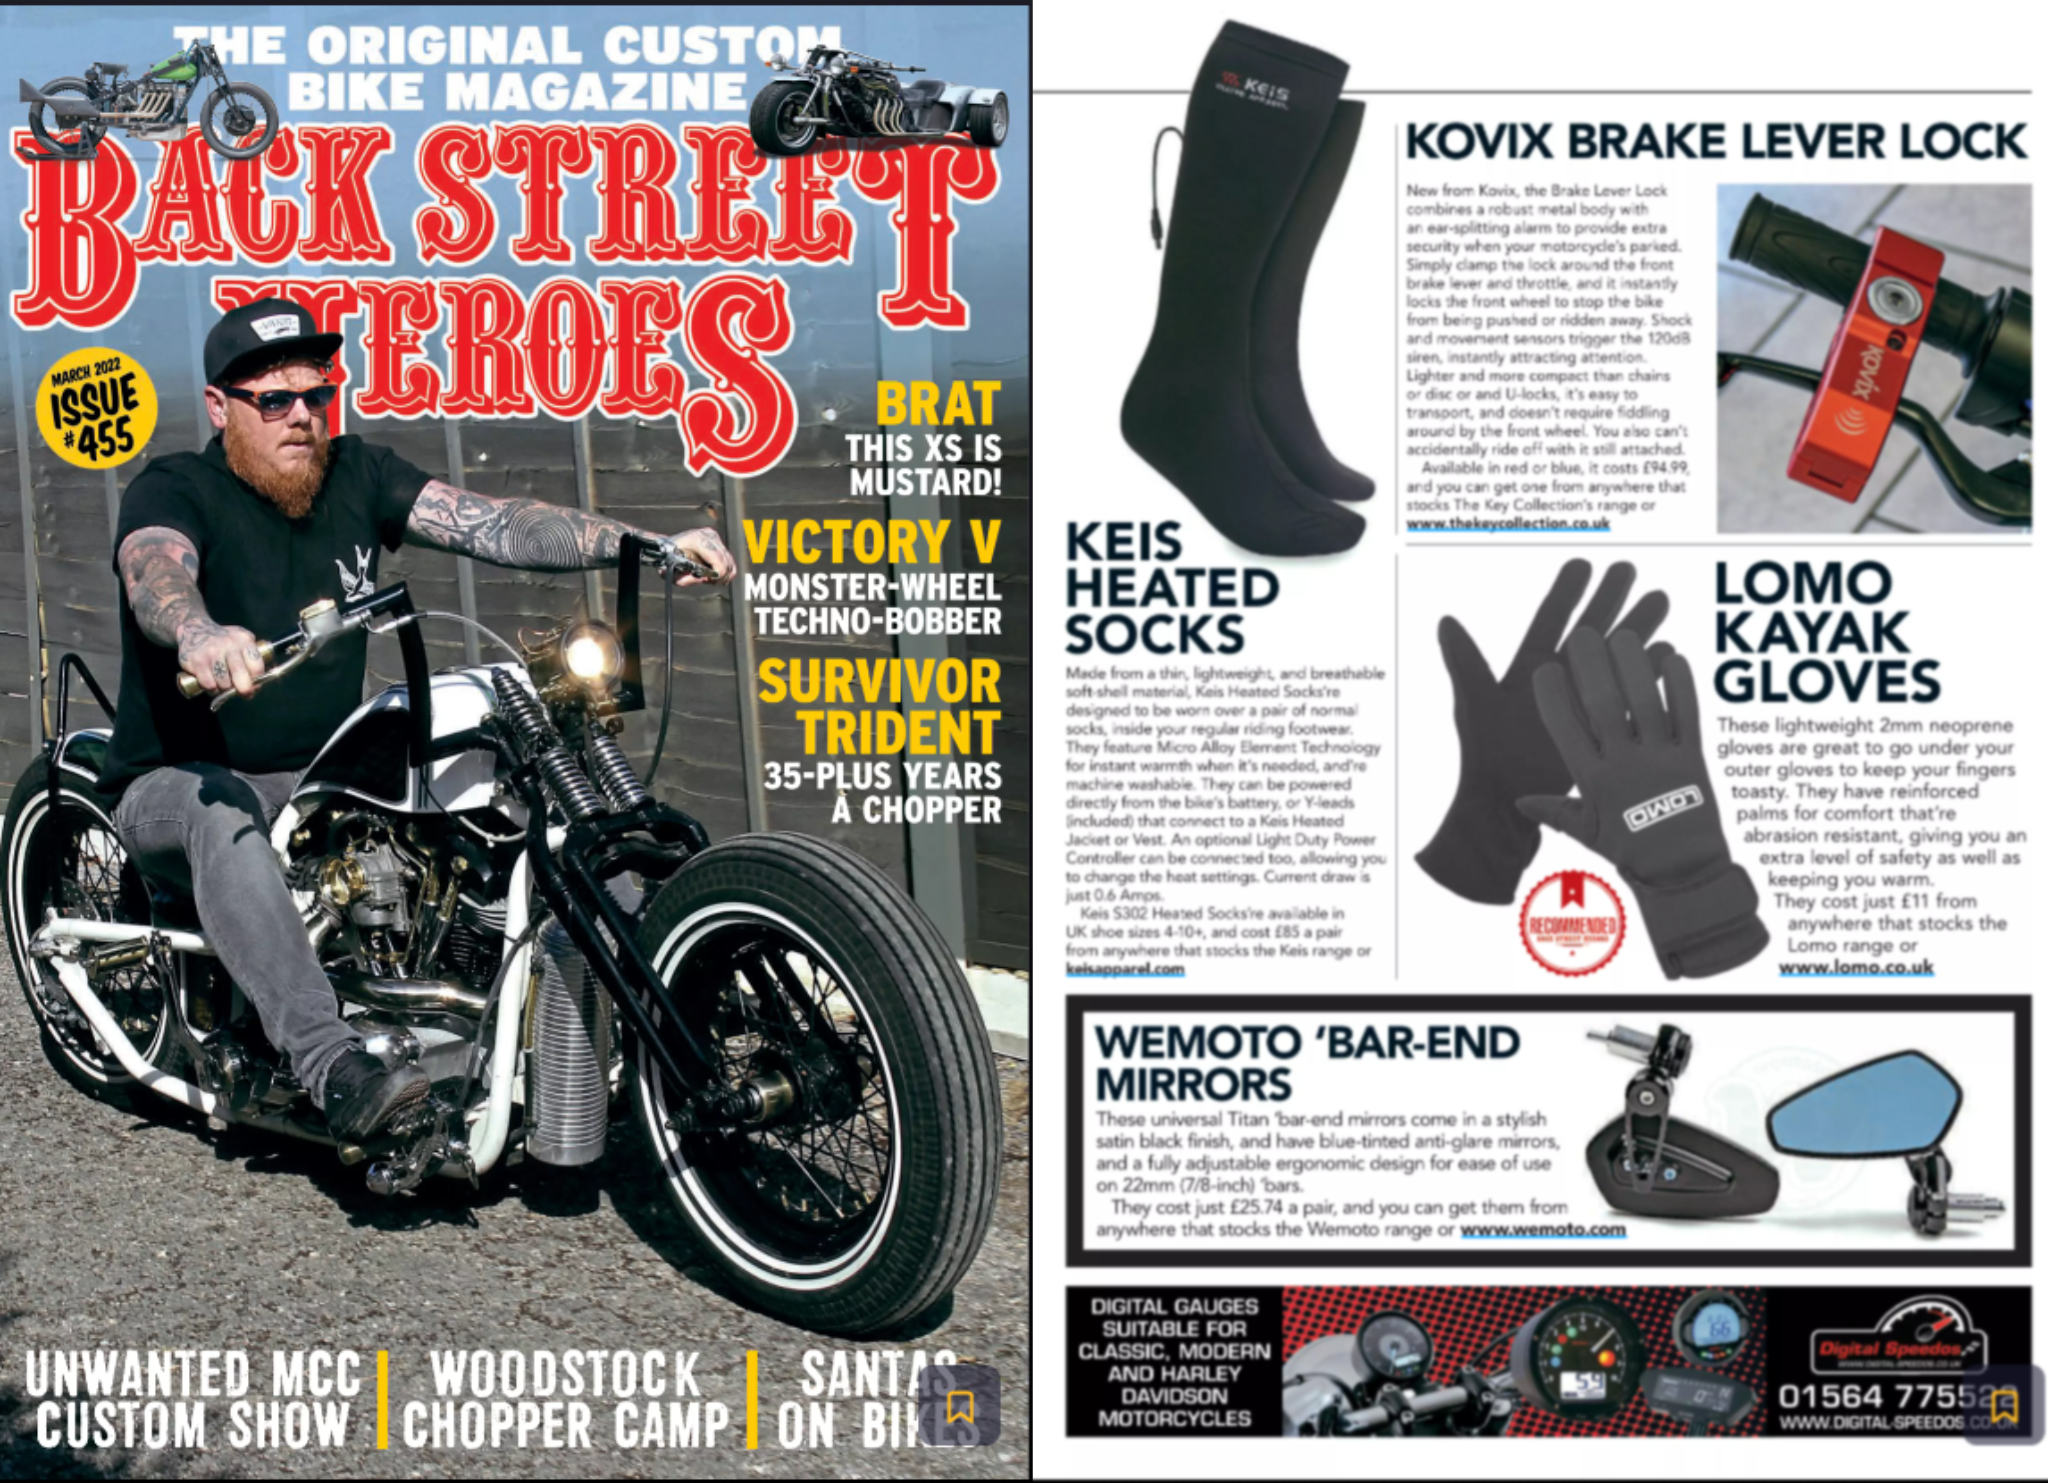 Back Street Heroes Gloves Review